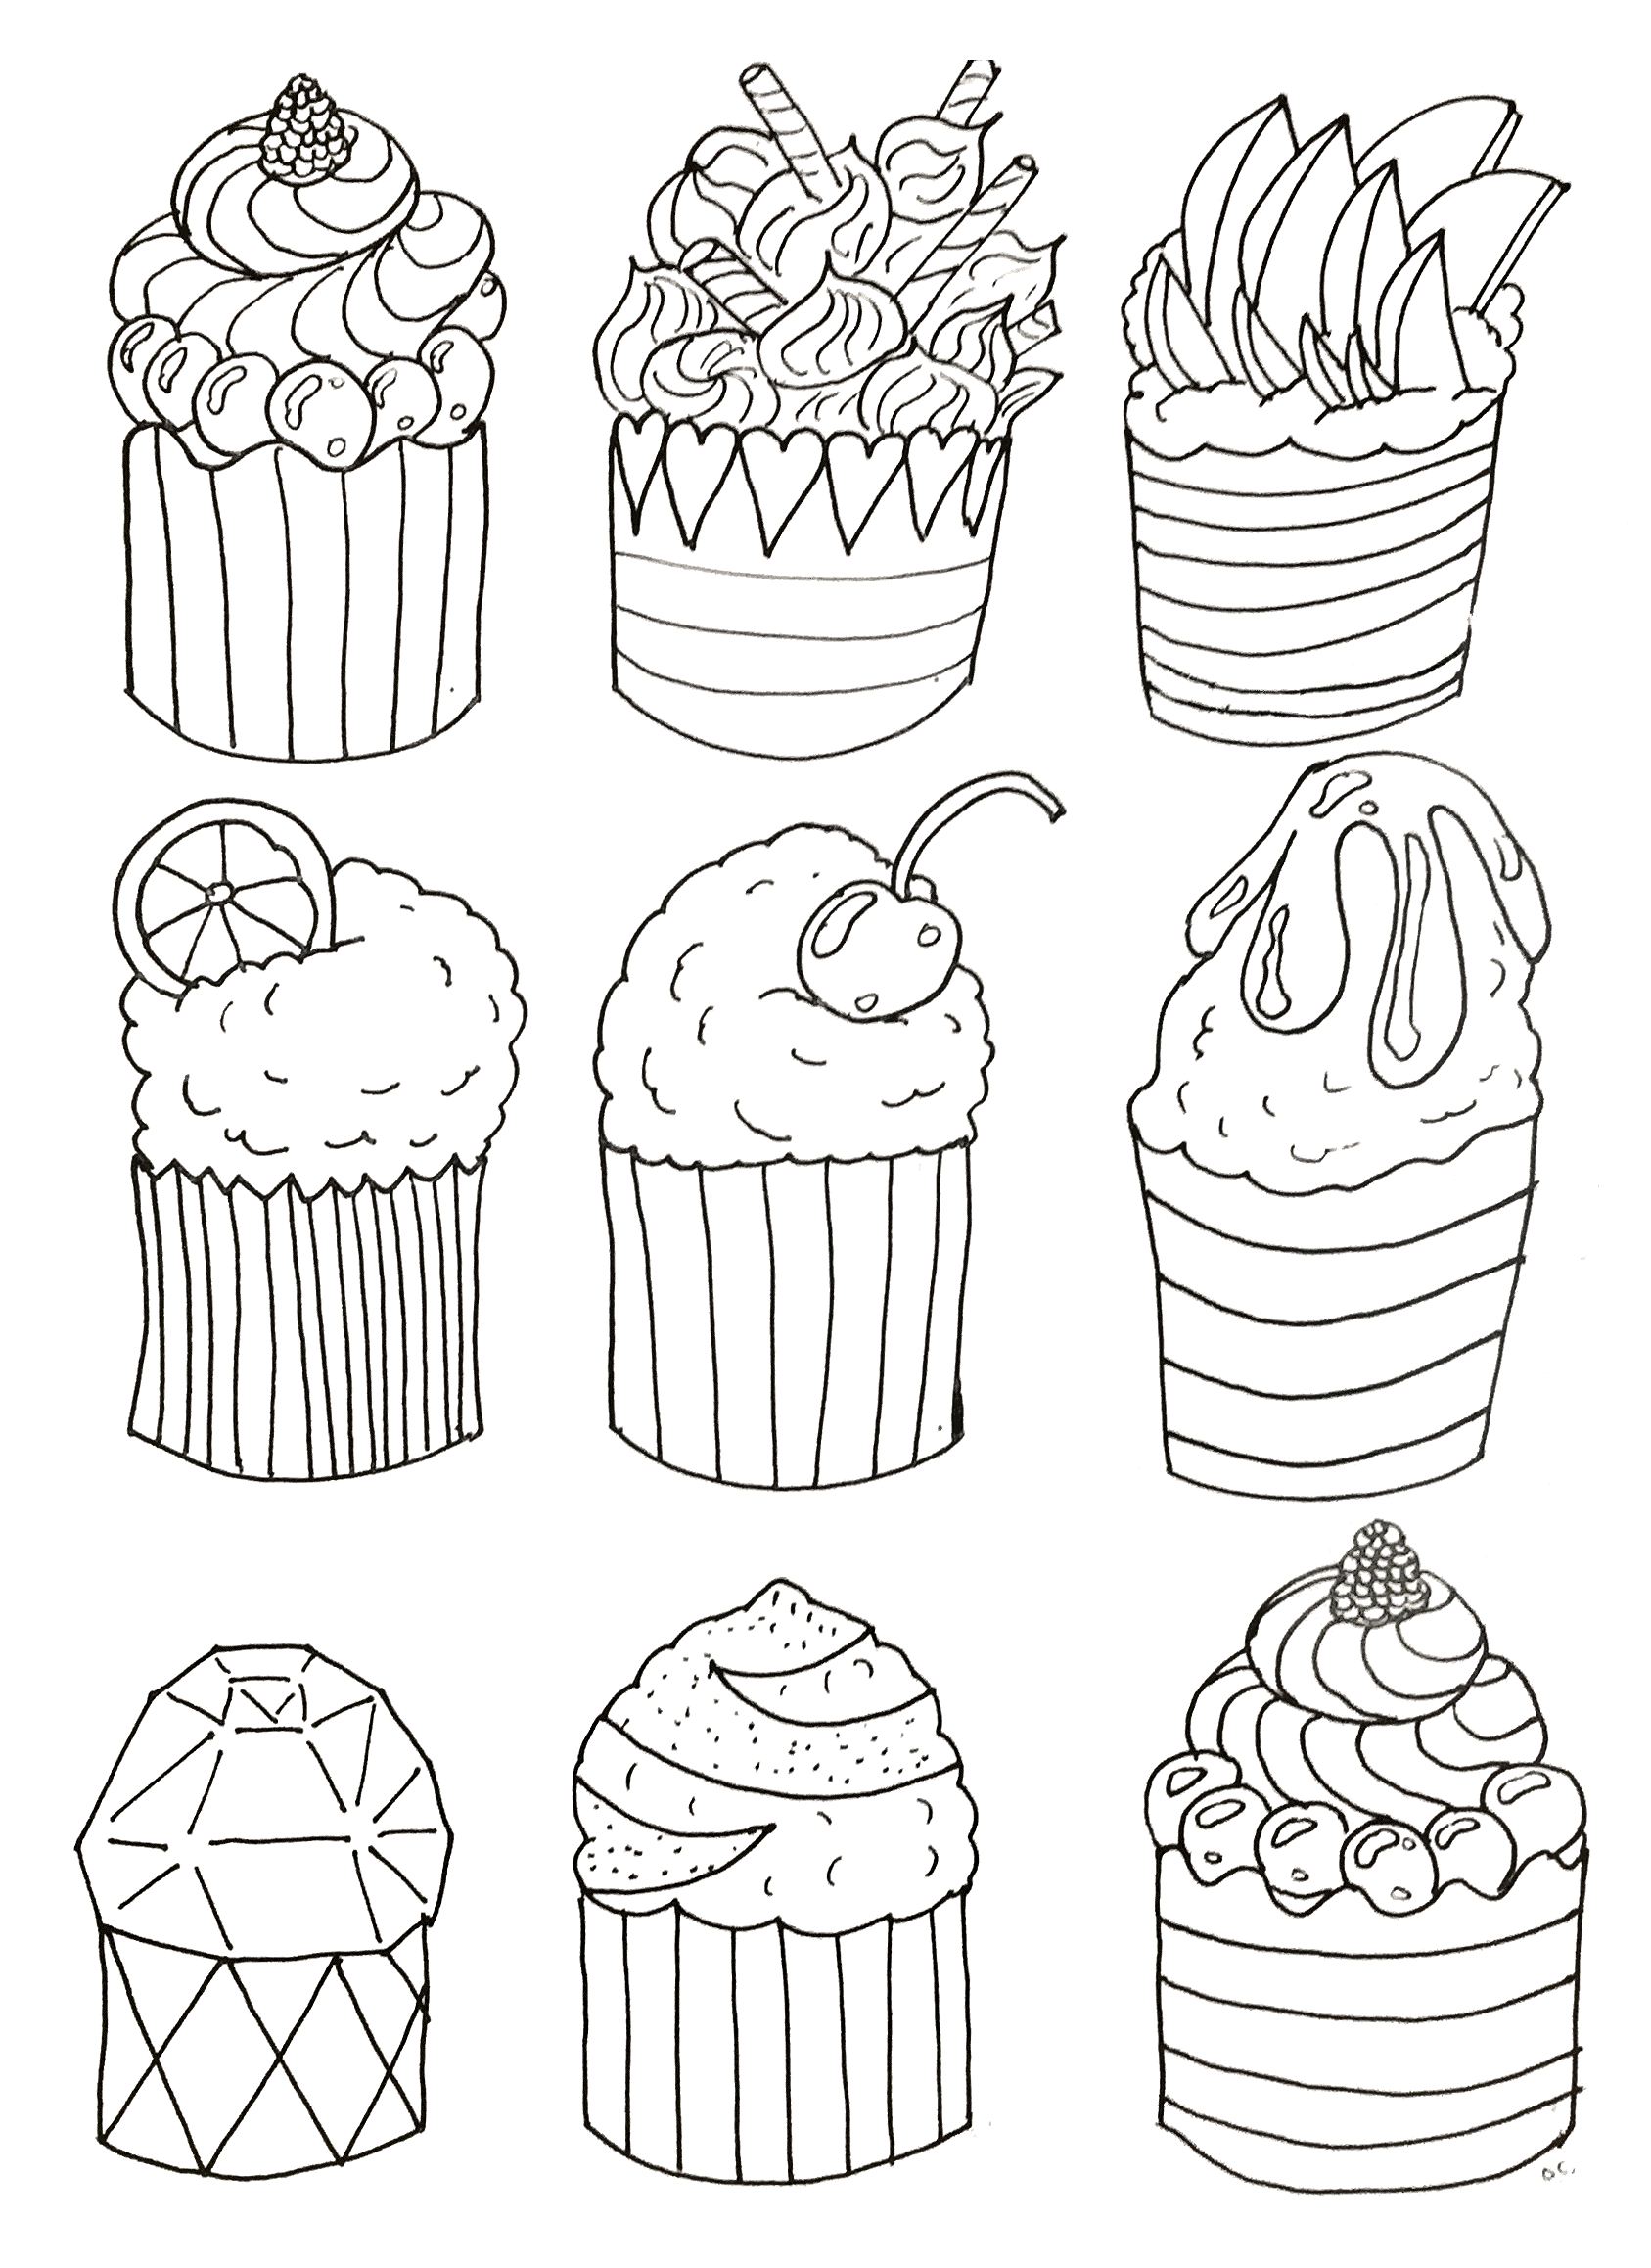 Simple cupcakes - Cupcakes Adult Coloring Pages